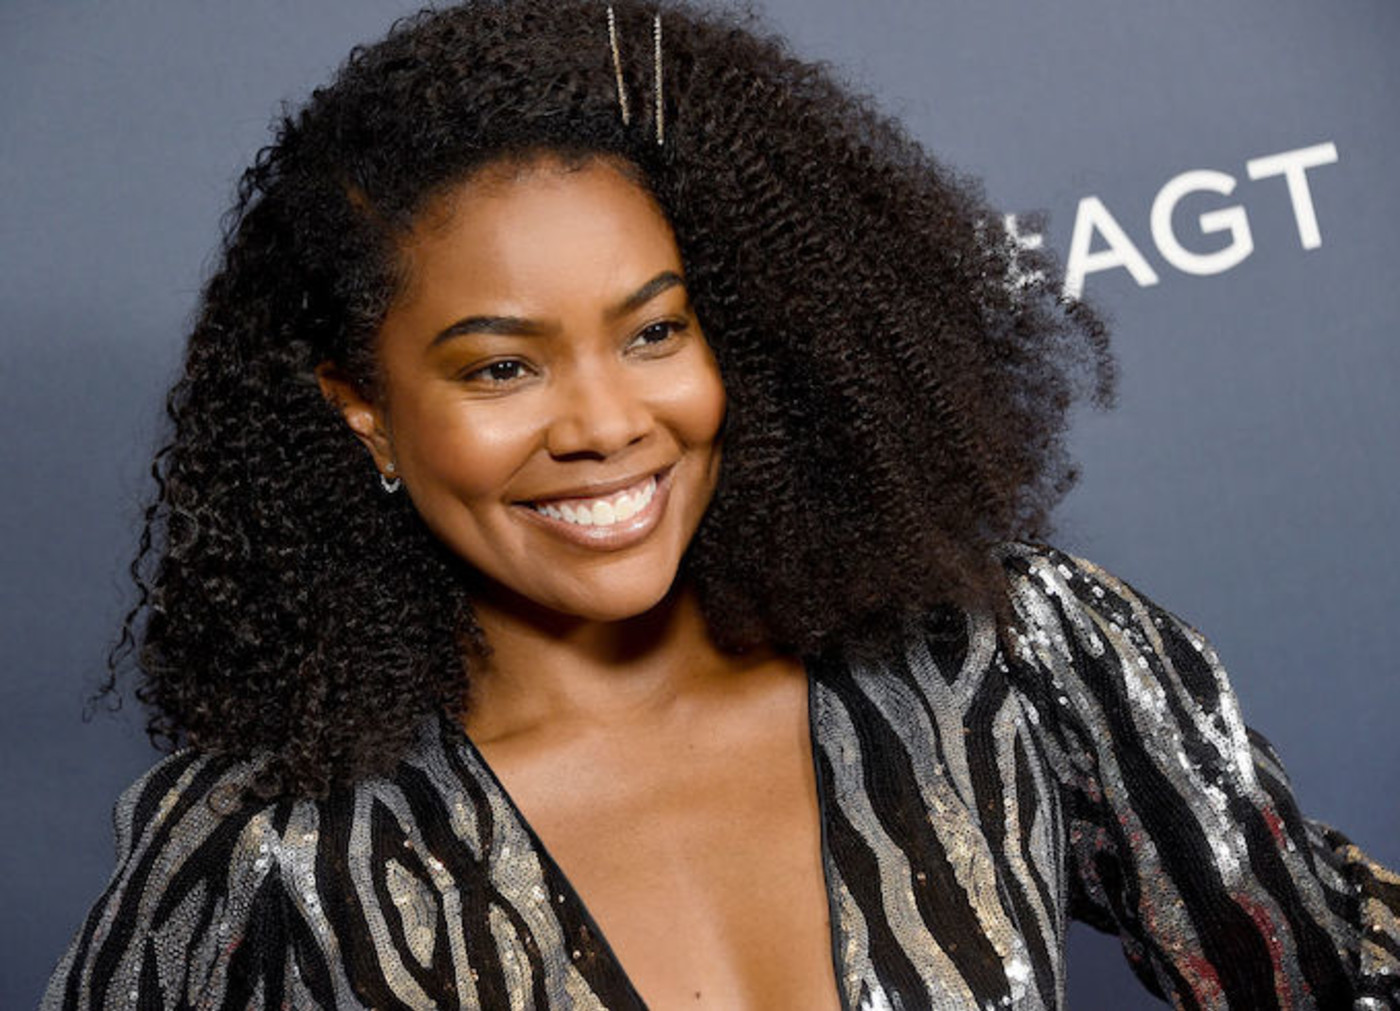 Gabrielle Union Reportedly Told Hairstyles Were Too Black Before Being Fired Update Complex